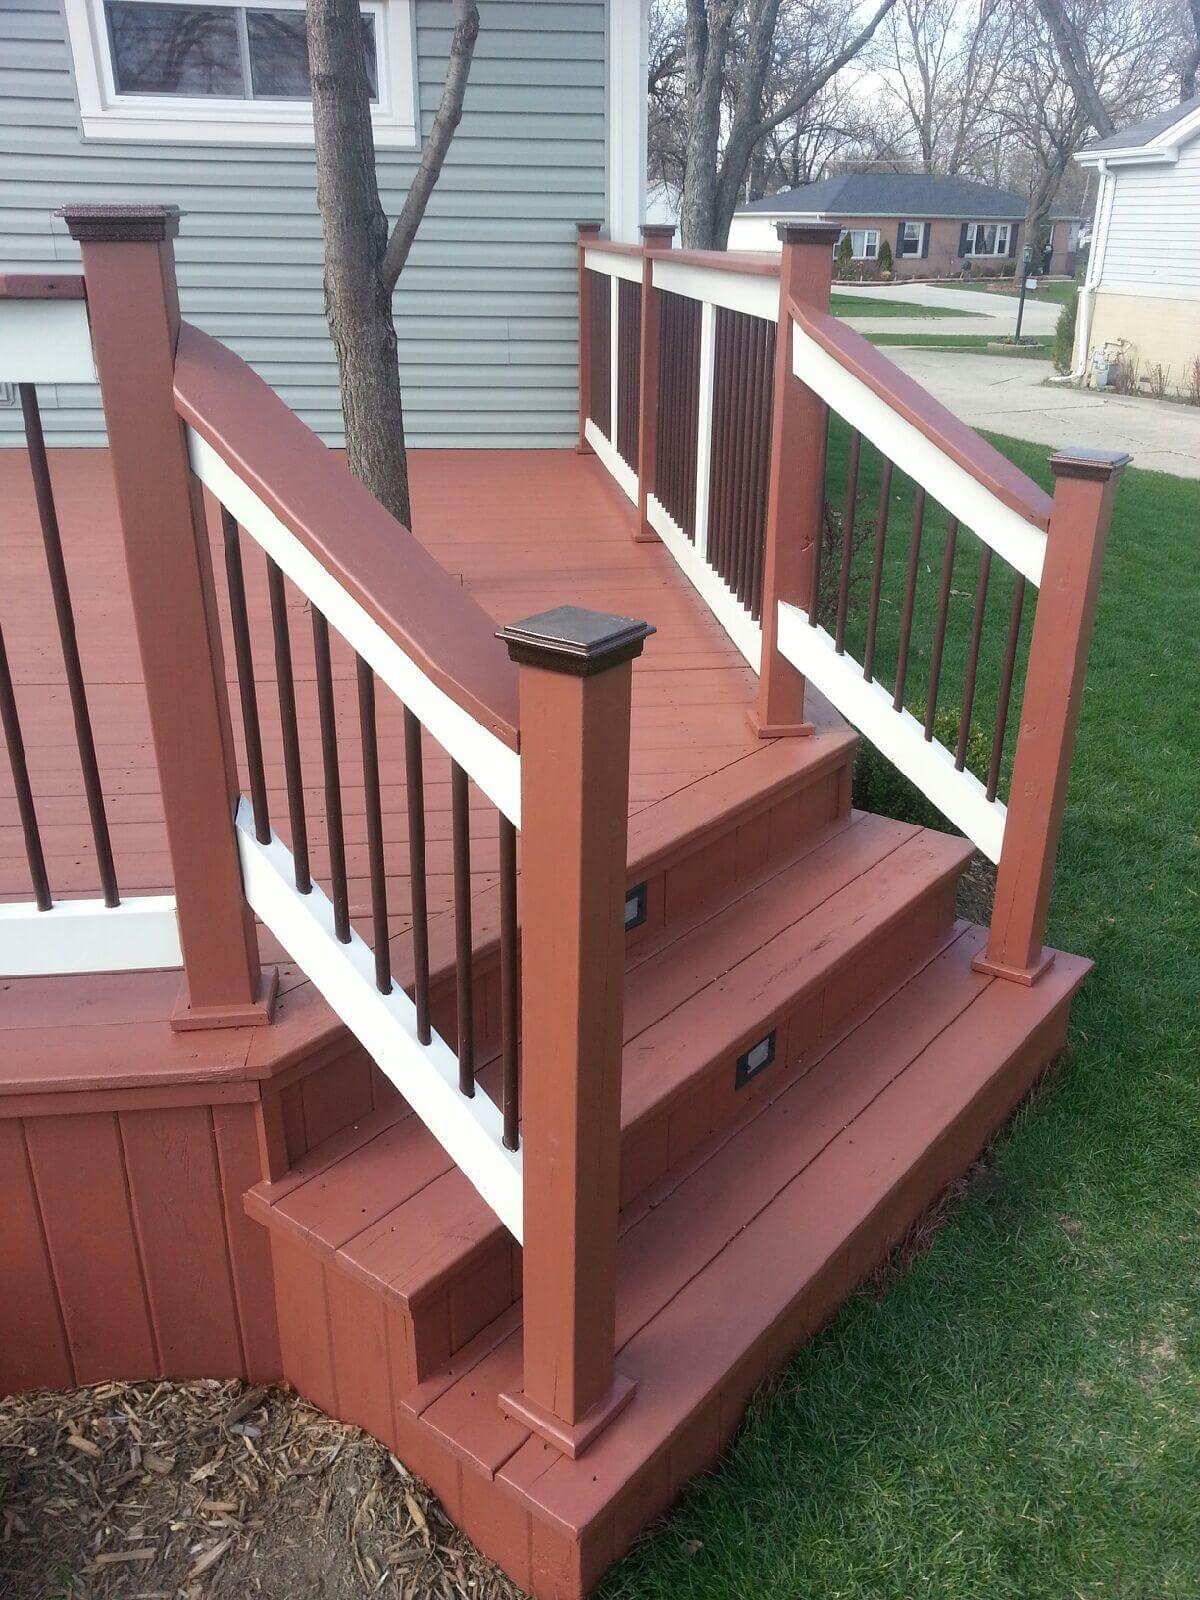 Repairs and maintenance for your deck, fence, and exterior wood staining. - Deck Staining Winfield - Deck Cleaning Services